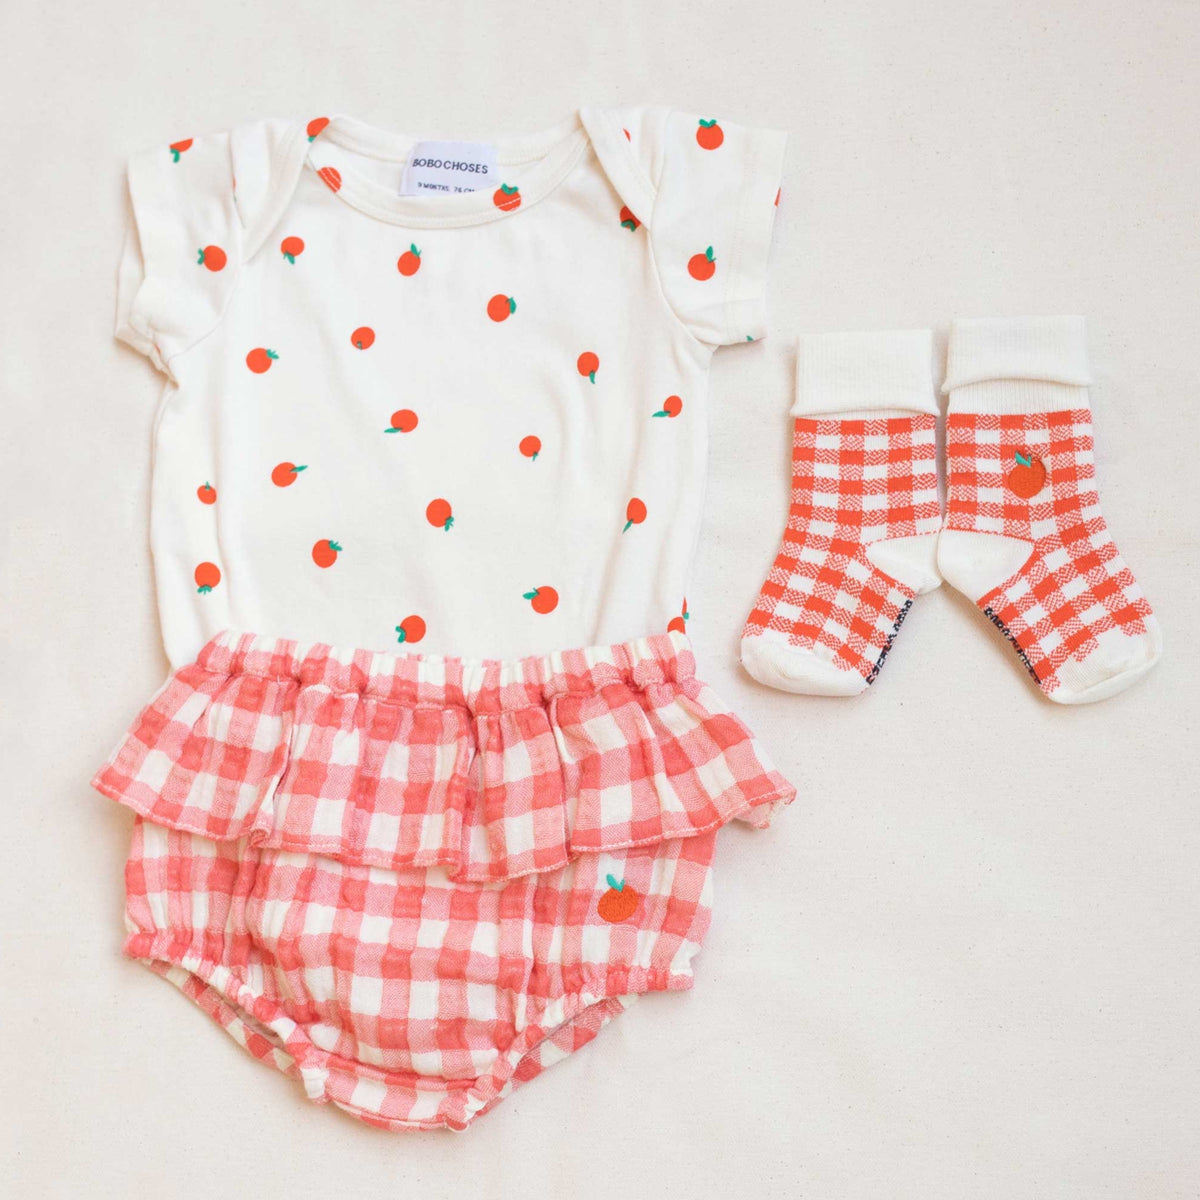 Baby Tomato body and Vichy accessories set